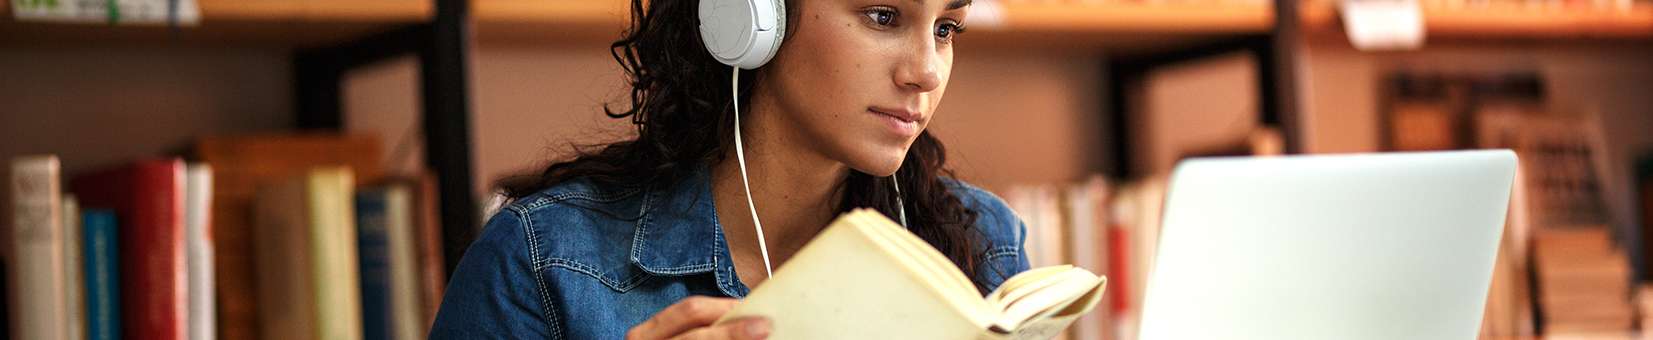 Photo of a student in headphones studying on a laptop